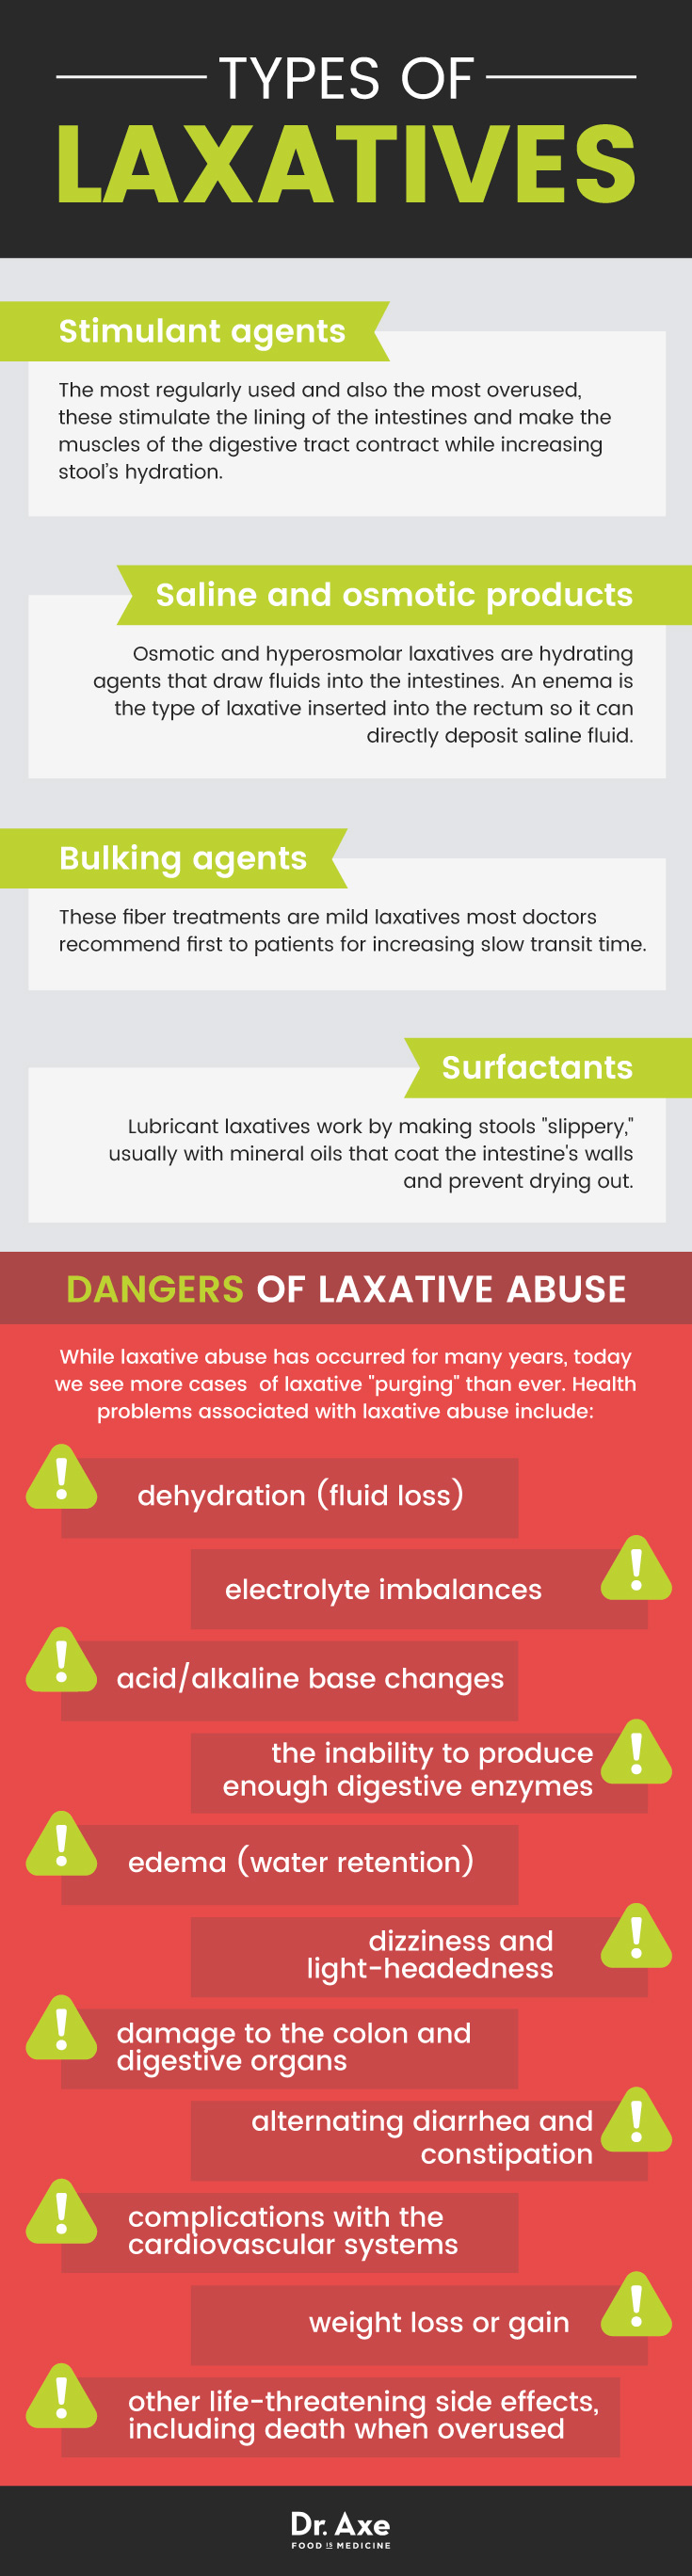 Types of laxatives - Dr. Axe